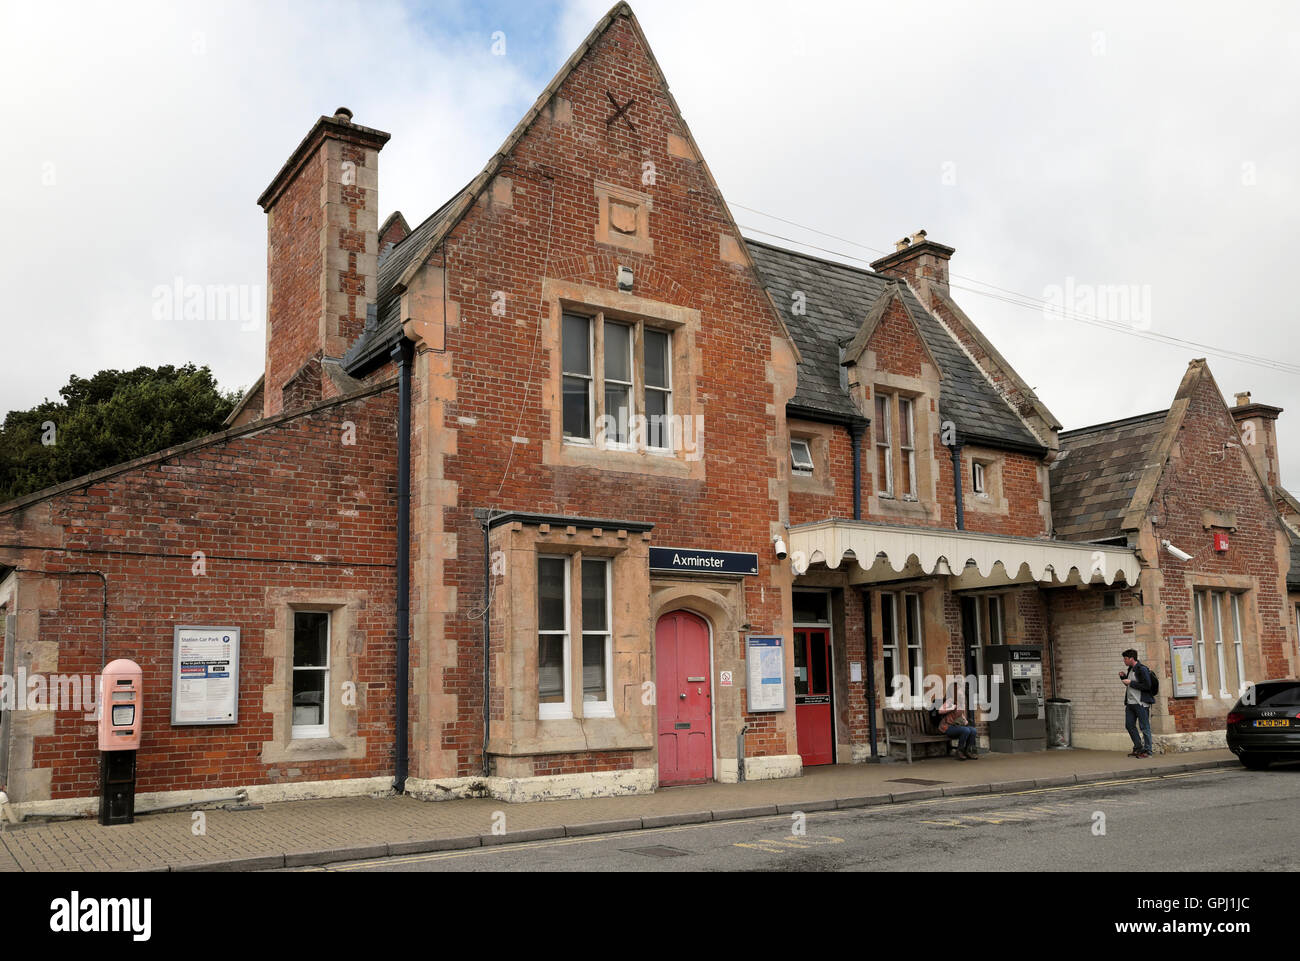 Exterior view of Axminster Railway Station designed by architect William Tite in 1860  in Devon, England UK   KATHY DEWITT Stock Photo